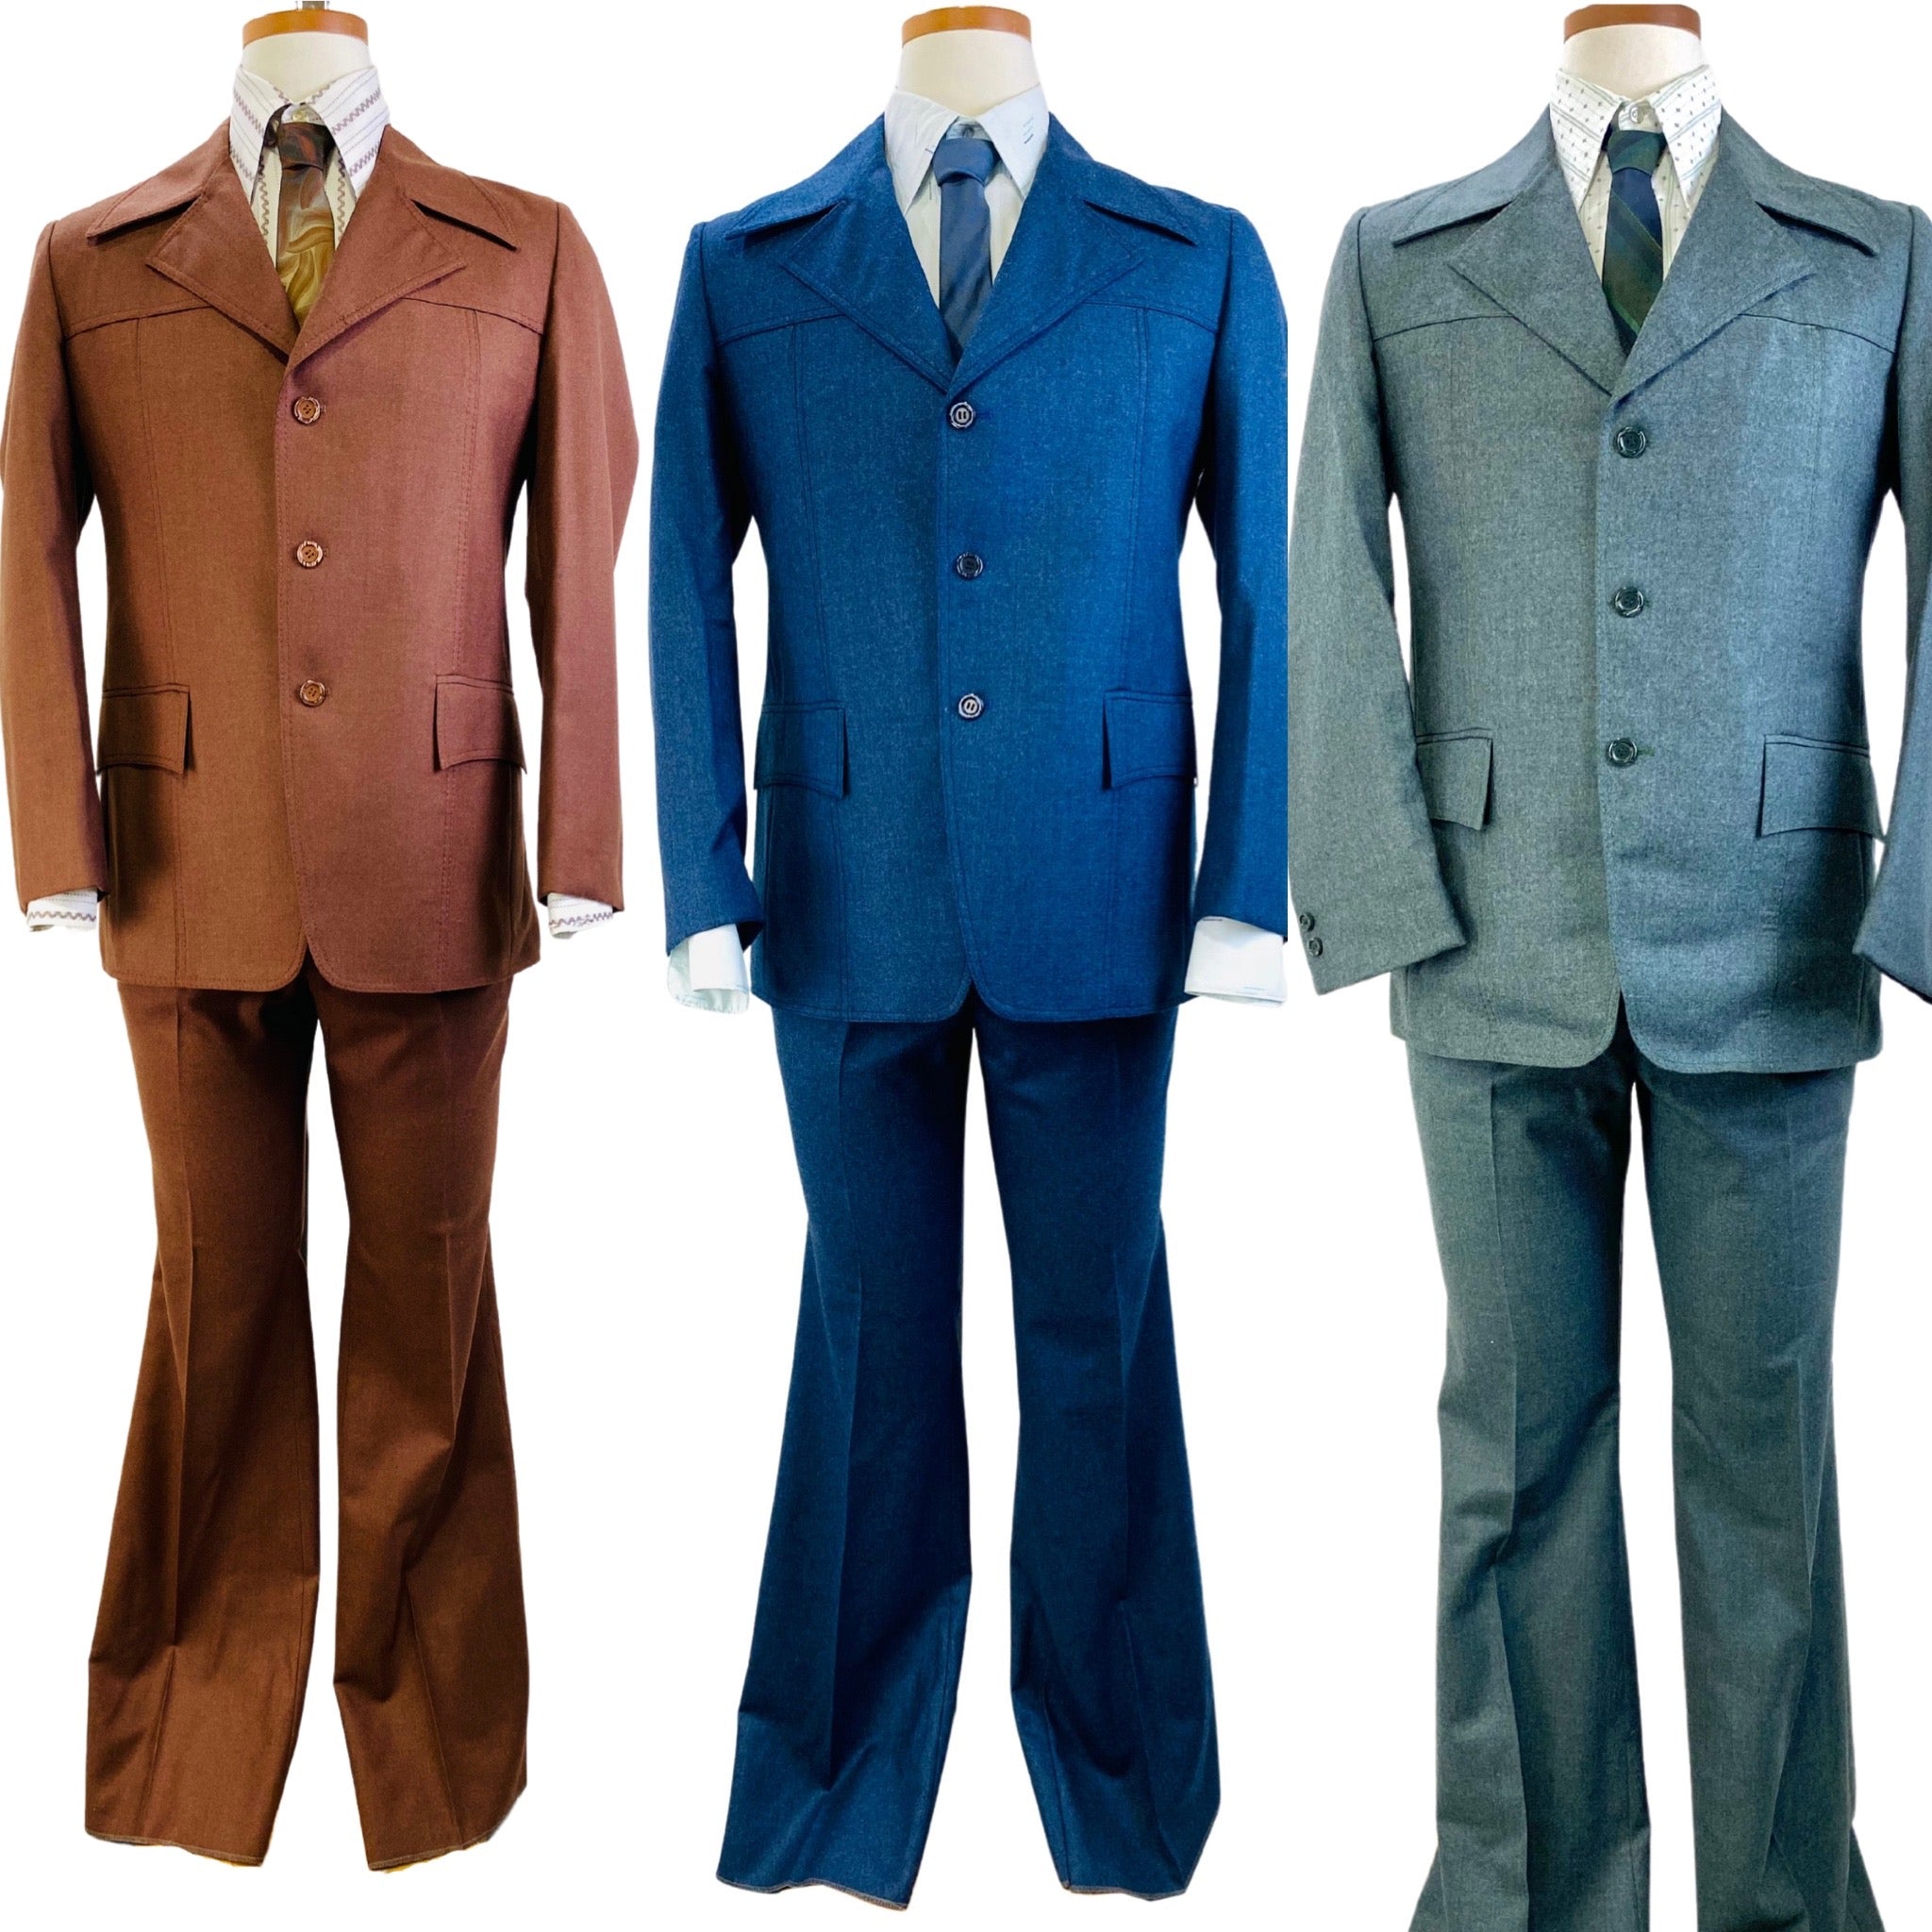 Vintage Men's Suits and Jackets – Ian Drummond Vintage